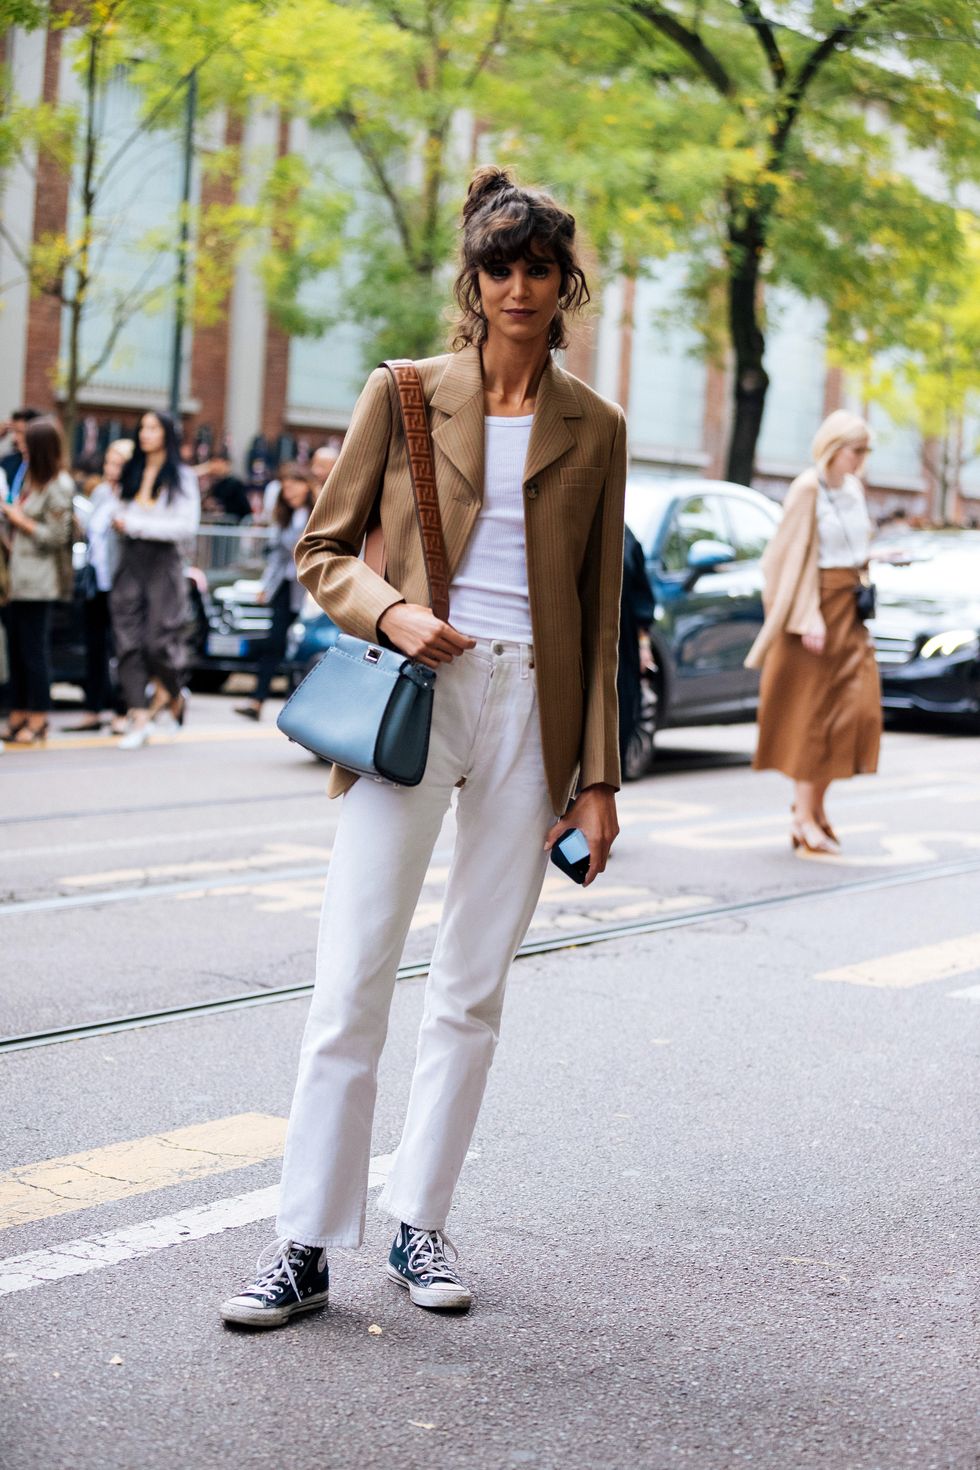 milan, italy   september 19  model mica arganaraz wears a light brown blazer, blue fendi bag, white tanktop, white jeans, and blue converse sneakers after the fendi show during milan fashion week springsummer 2020 on september 19, 2019 in milan, italy photo by melodie jenggetty images